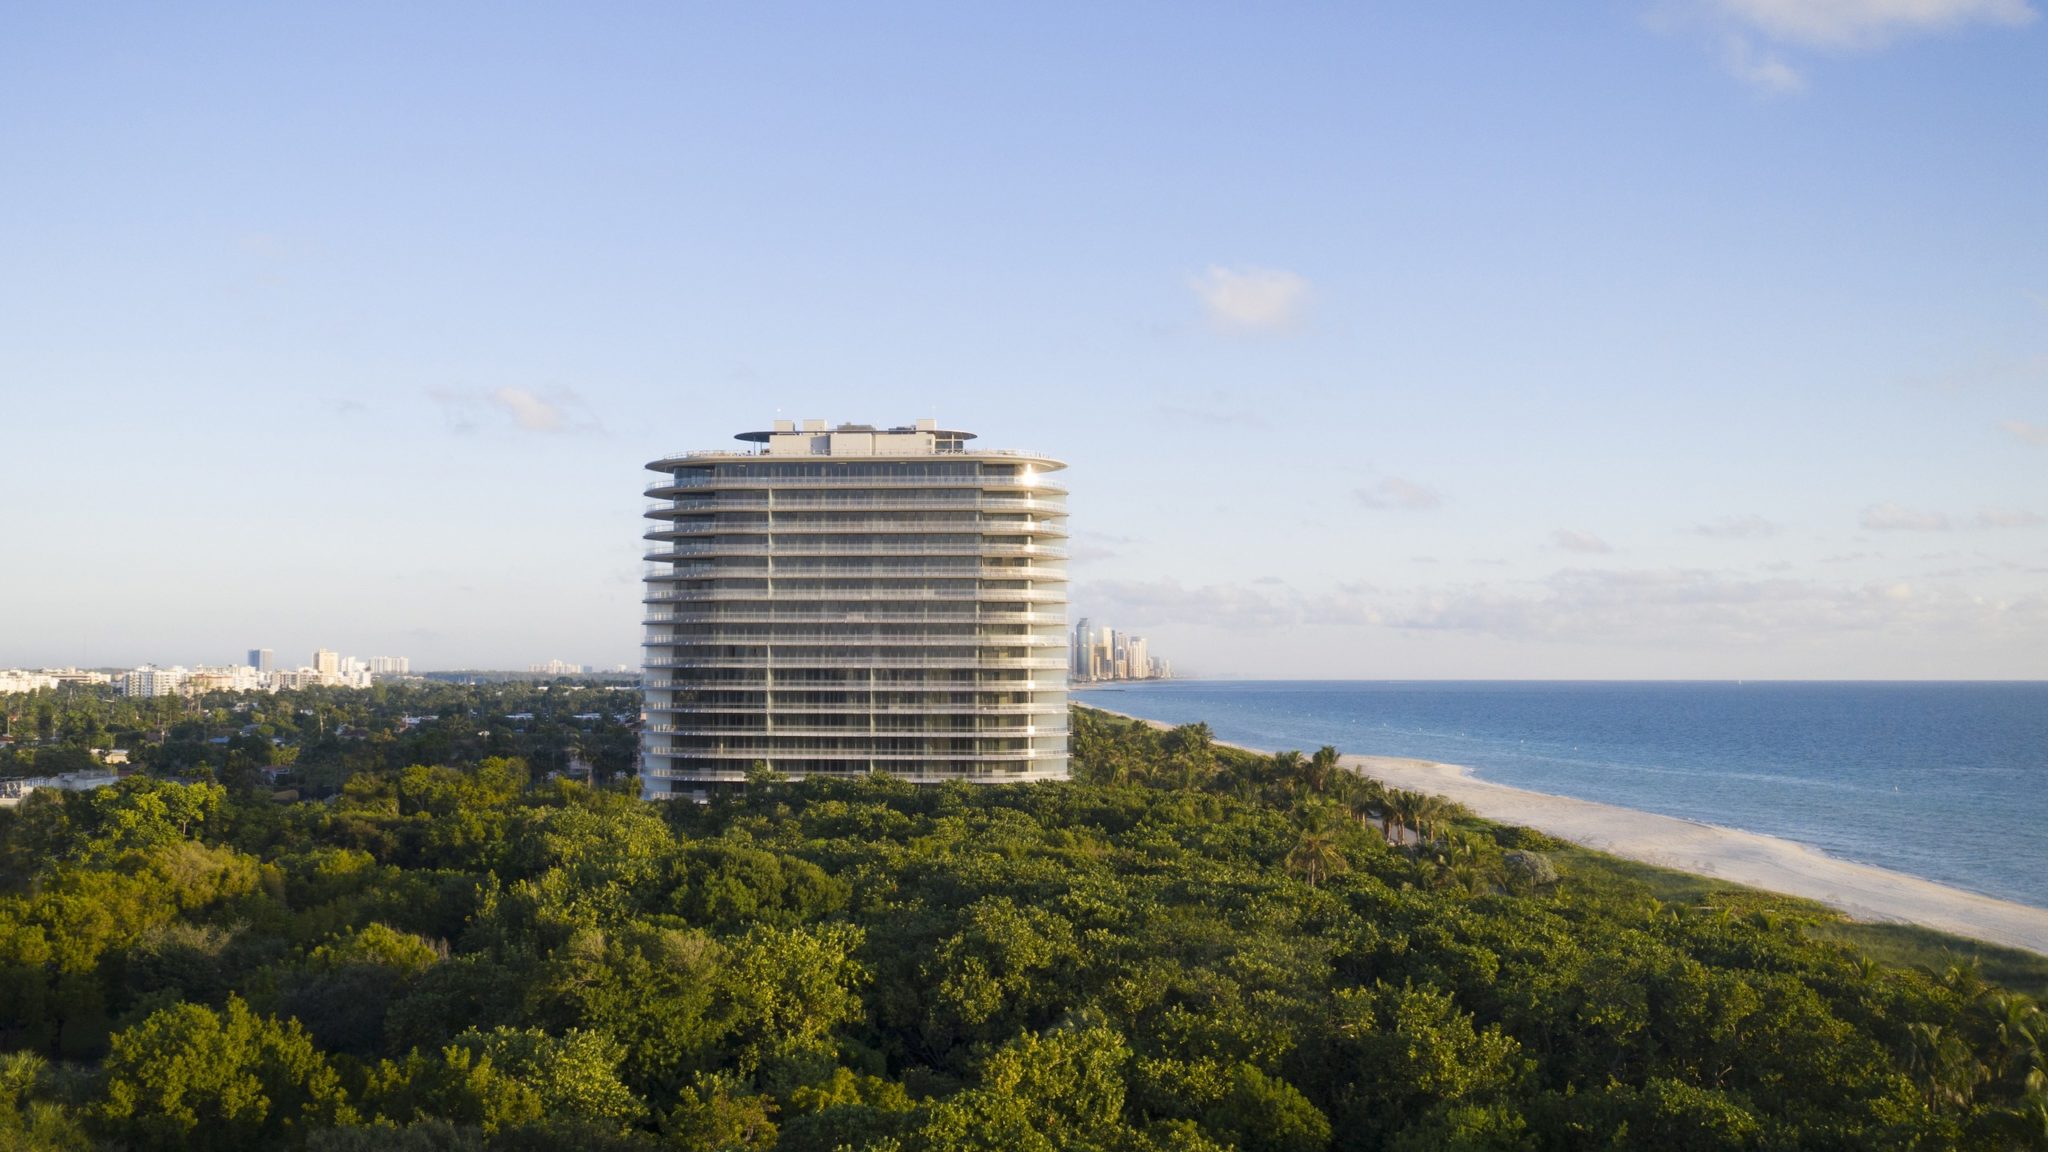 Eighty Seven Park: Here’s a first look at the newly completed beachfront project in Miami Beach